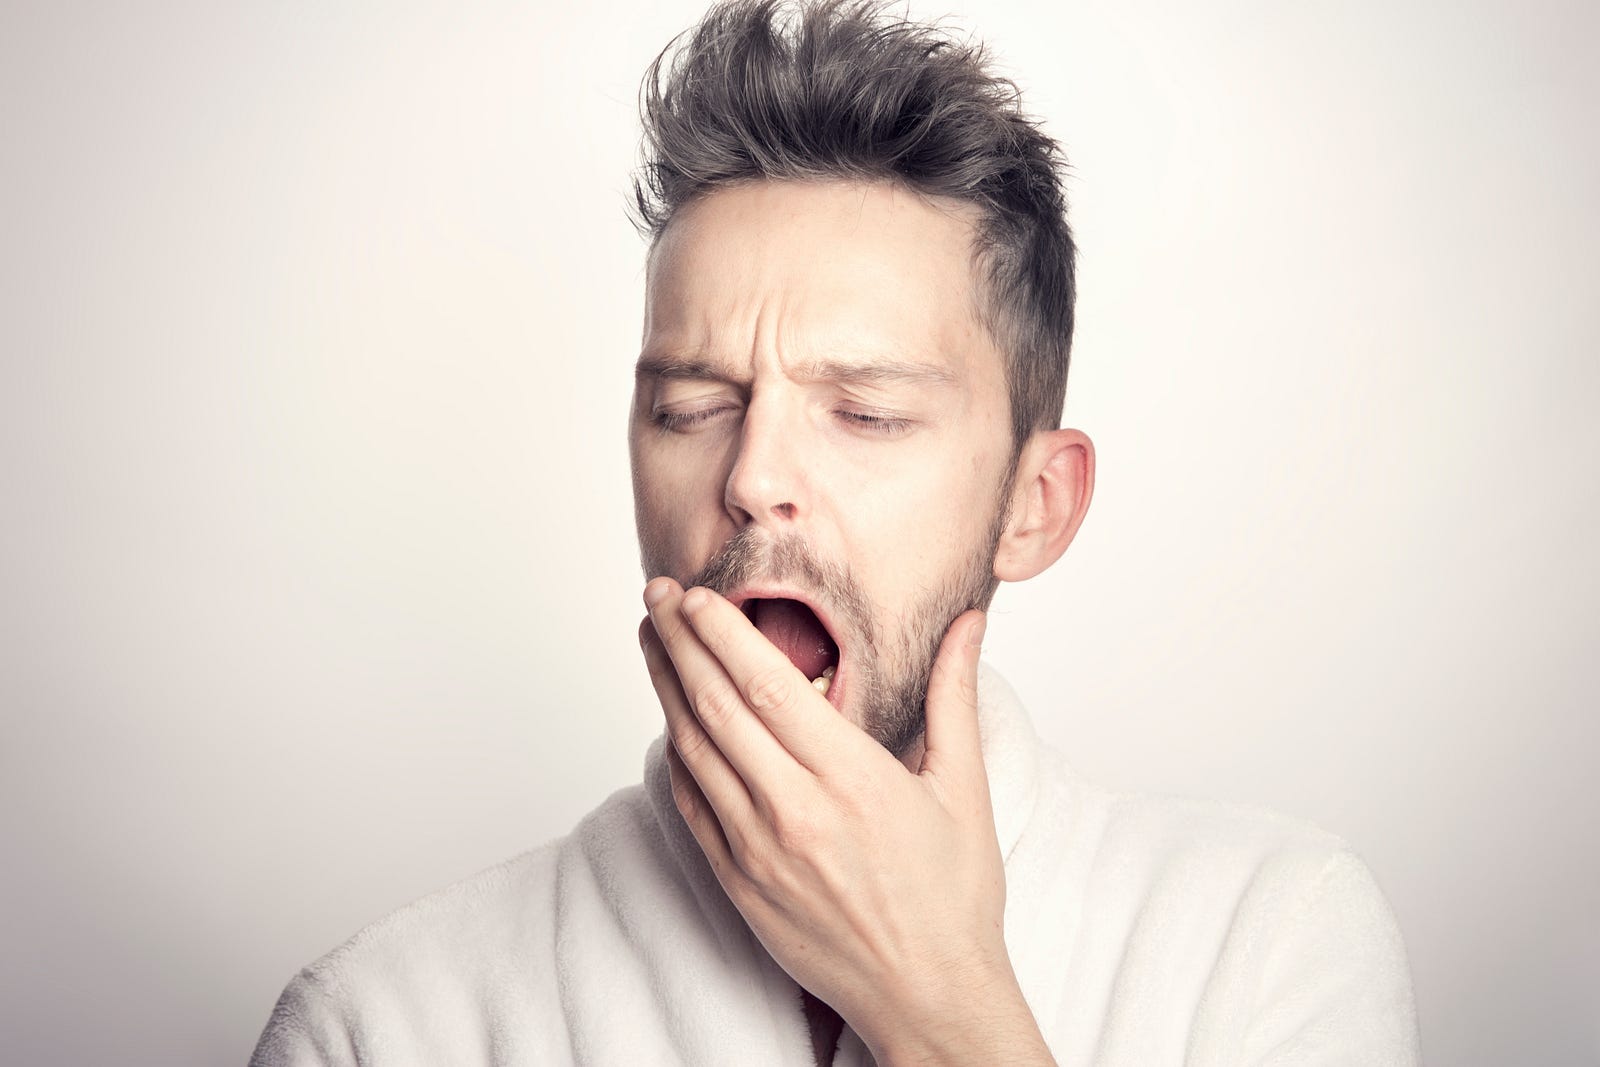 A young man yawns, covering his open mouth with his left hand. Insomnia:  Melatonin might reduce the time it takes to fall asleep, but its effects on sleep quality and total sleep time aren’t clear. Older melatonin-deficient adults might get benefit from insomnia.